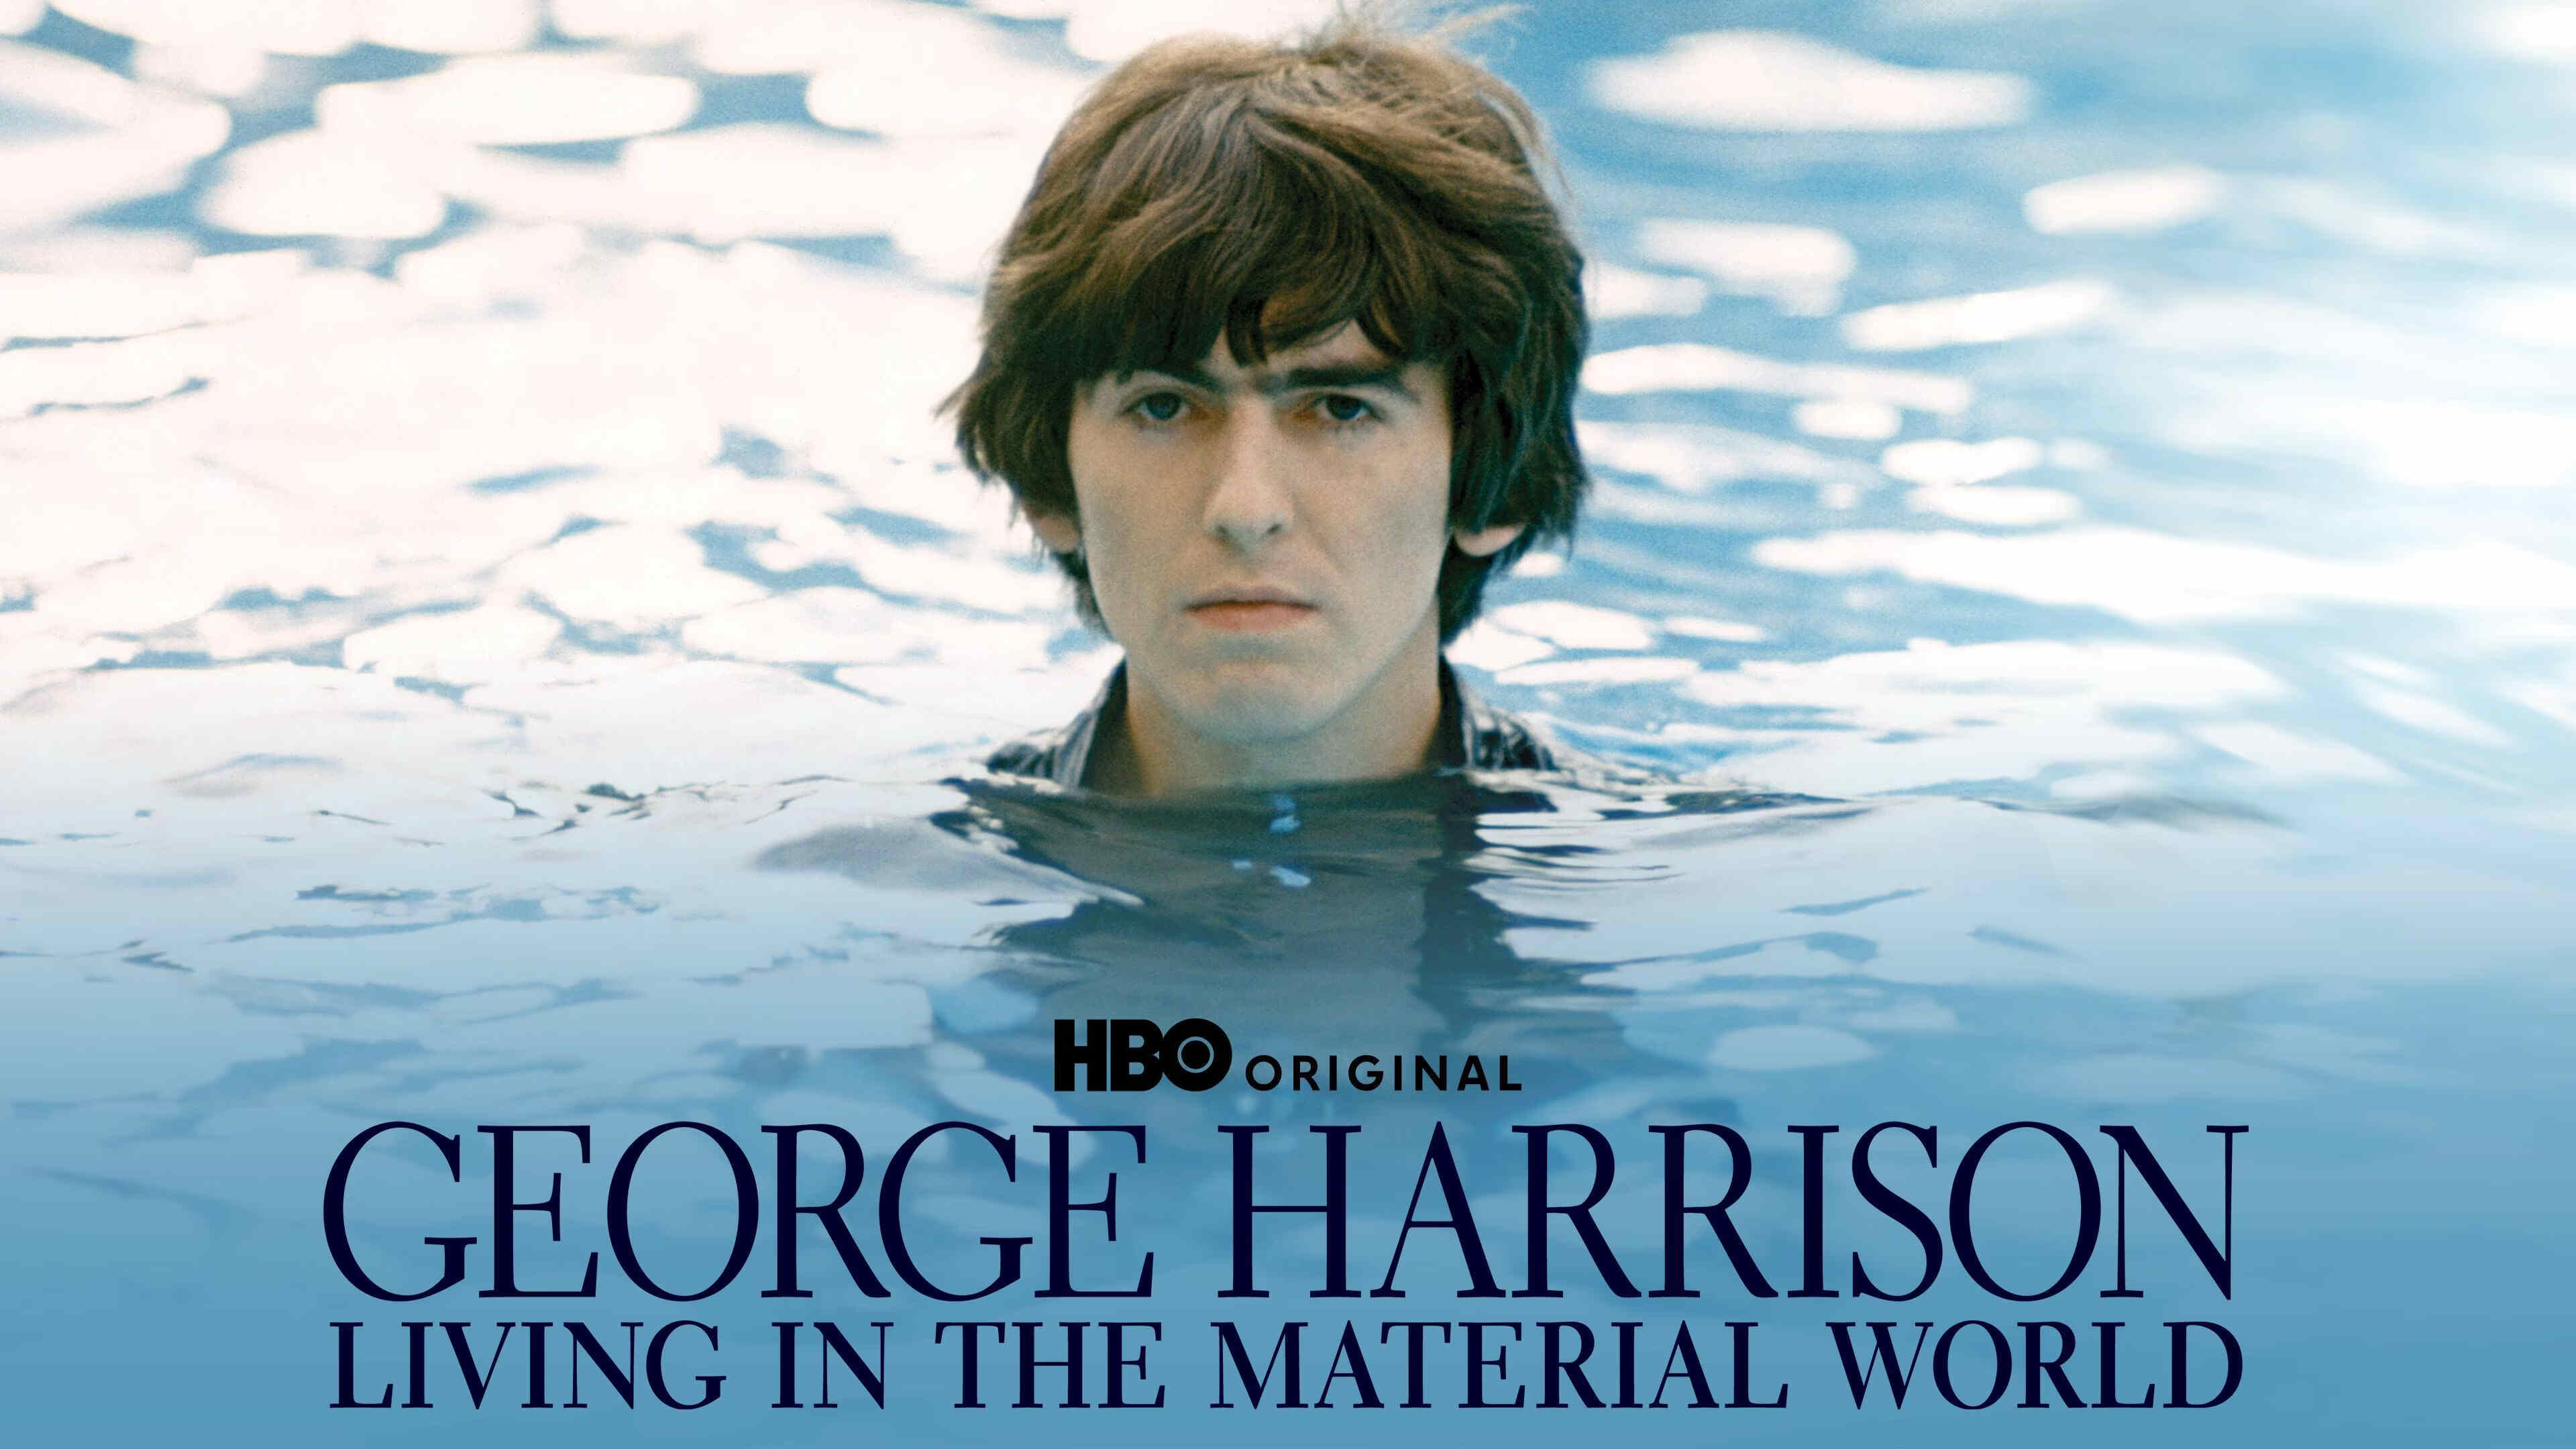 32-facts-about-the-movie-george-harrison-living-in-the-material-world